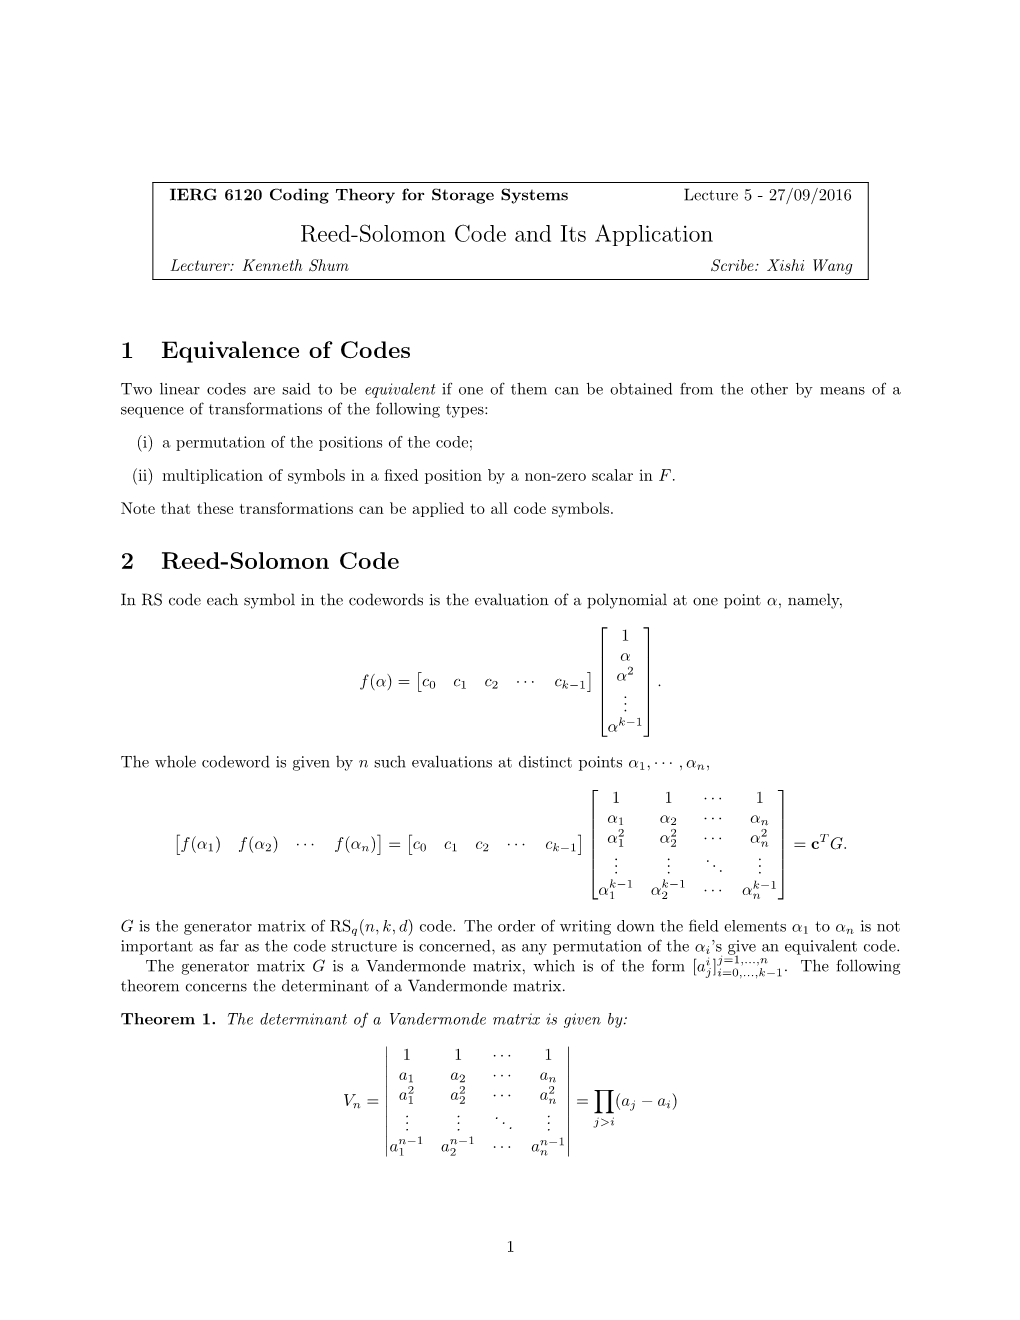 Reed-Solomon Code and Its Application 1 Equivalence